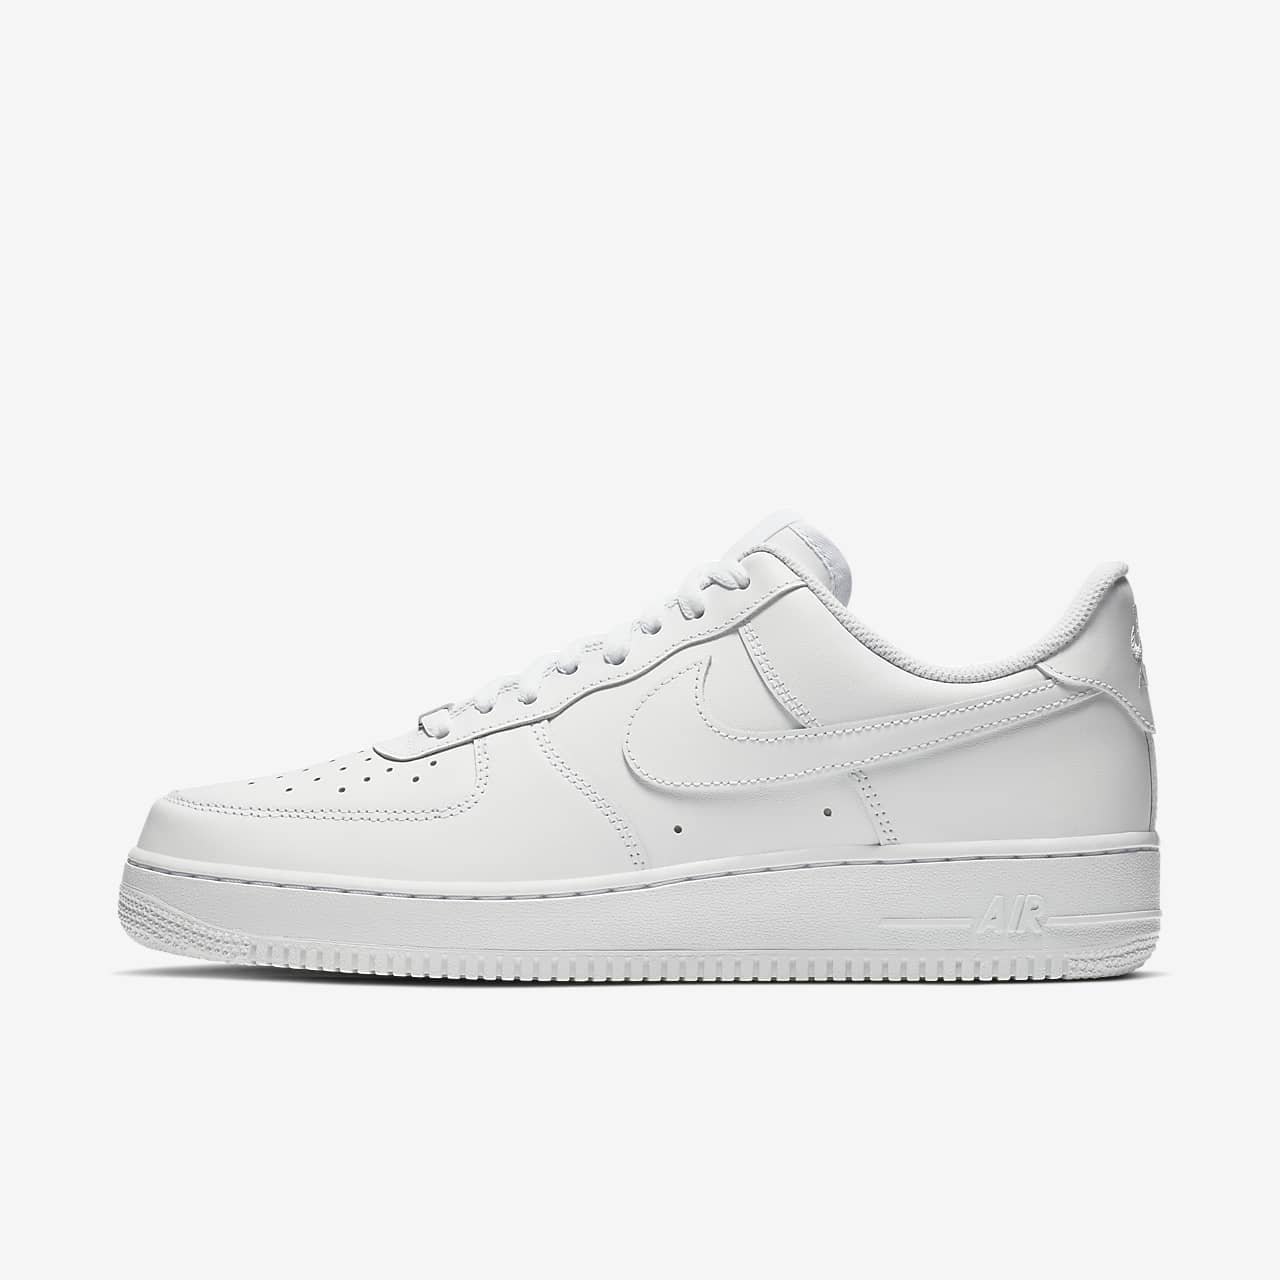 Chaussure Nike Air Force 1 ‘07 pour Homme